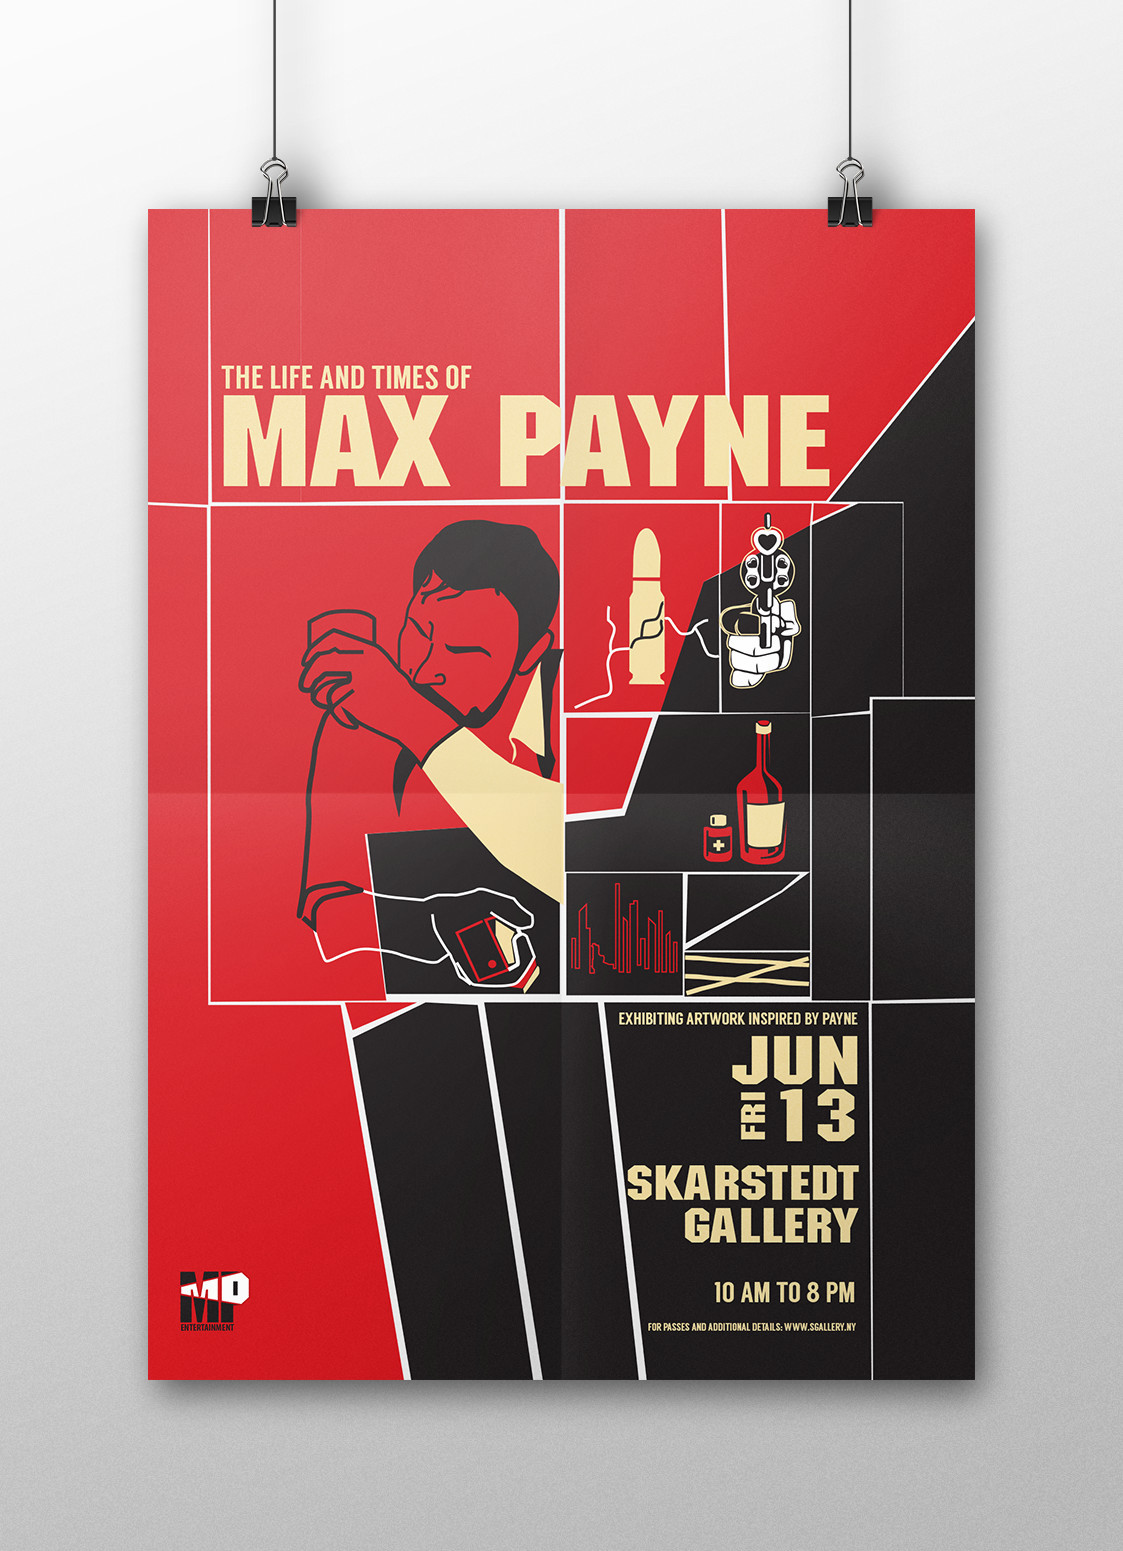 max payne Event Poster red black illustrated